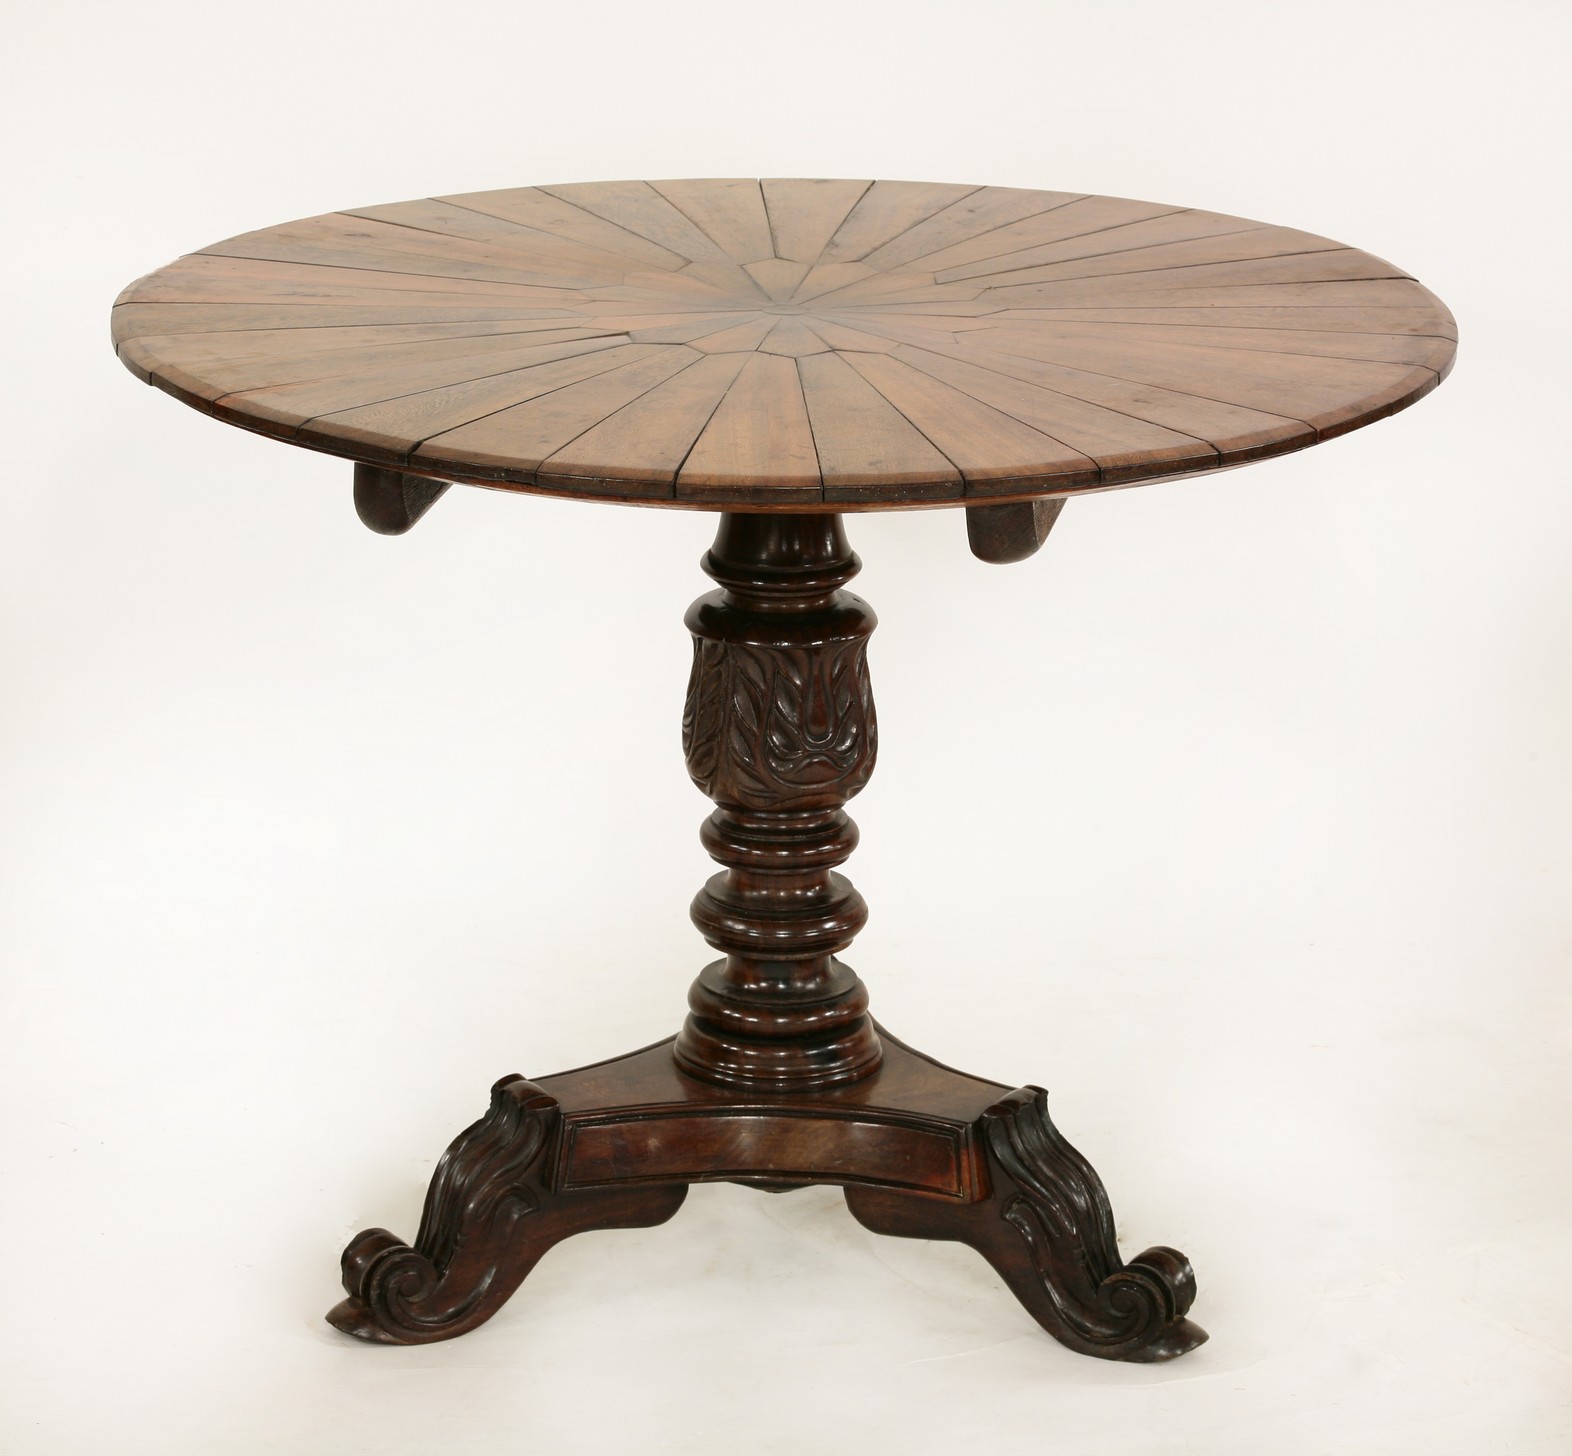 An Anglo Indian carved palmwood table,
19th century, the circular top composed of alternating radial